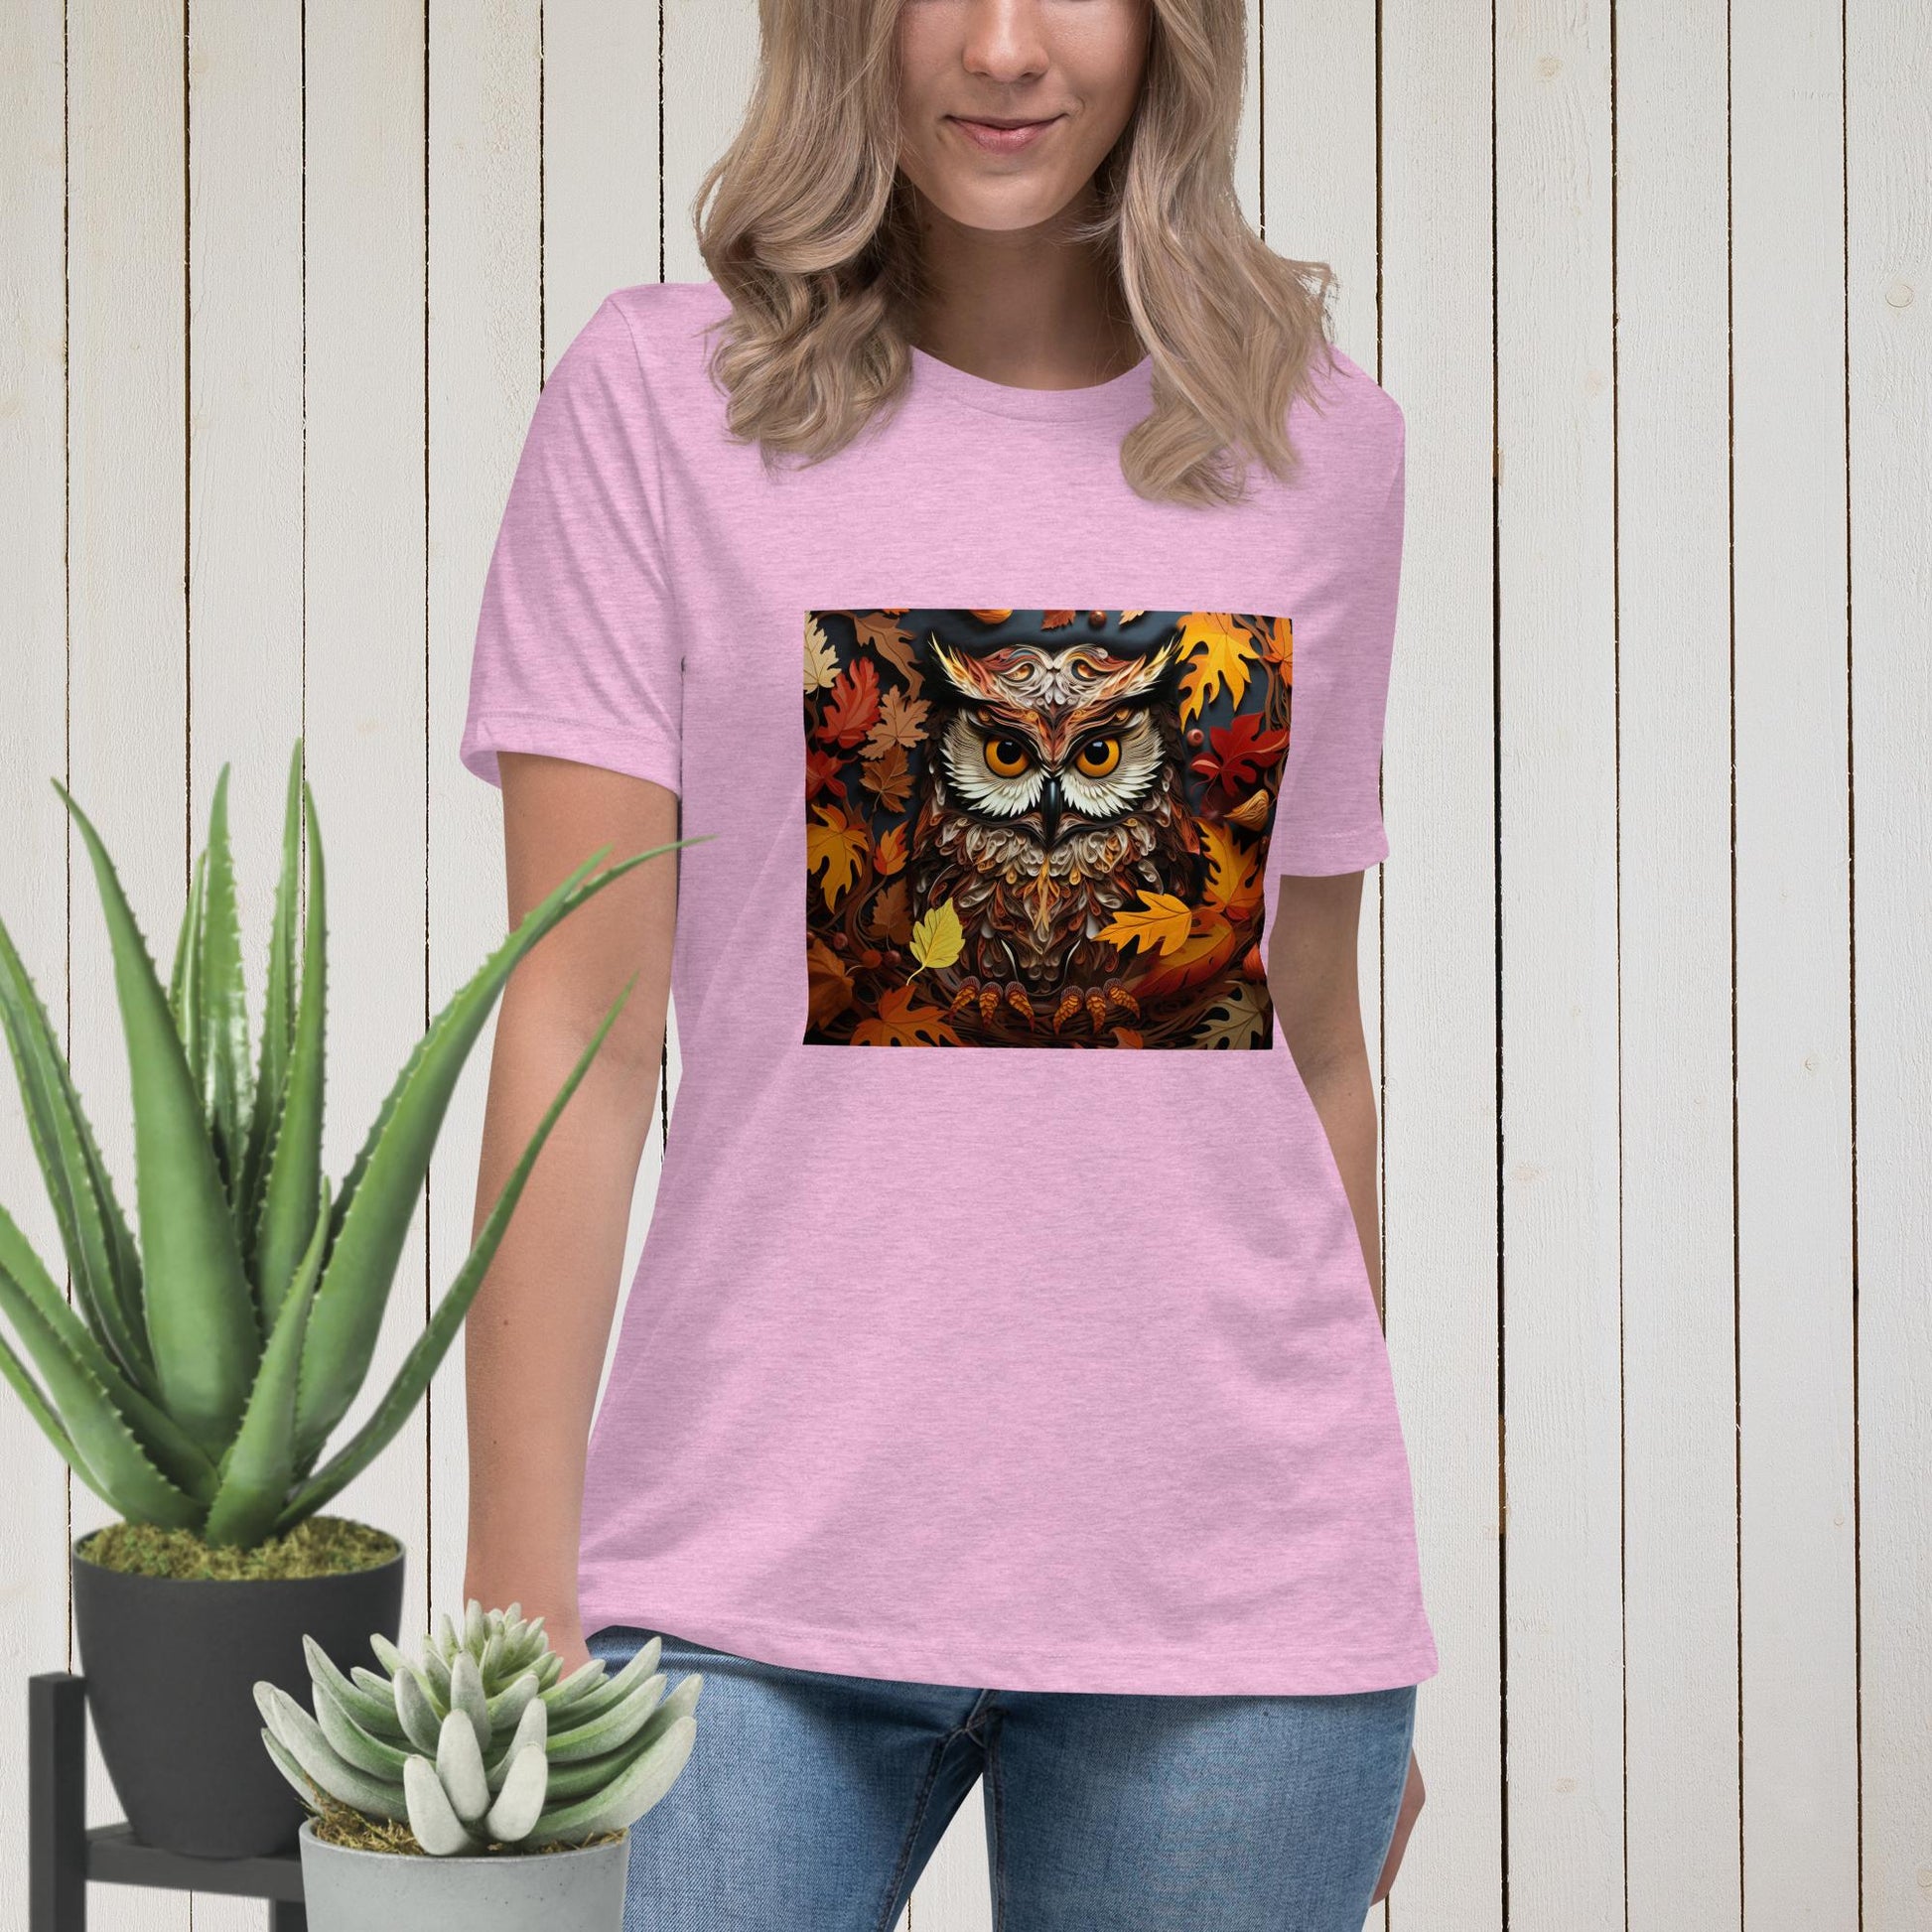 Owl in Fall Women's Relaxed T-Shirt - Legacy Creator IncHeather Prism LilacS